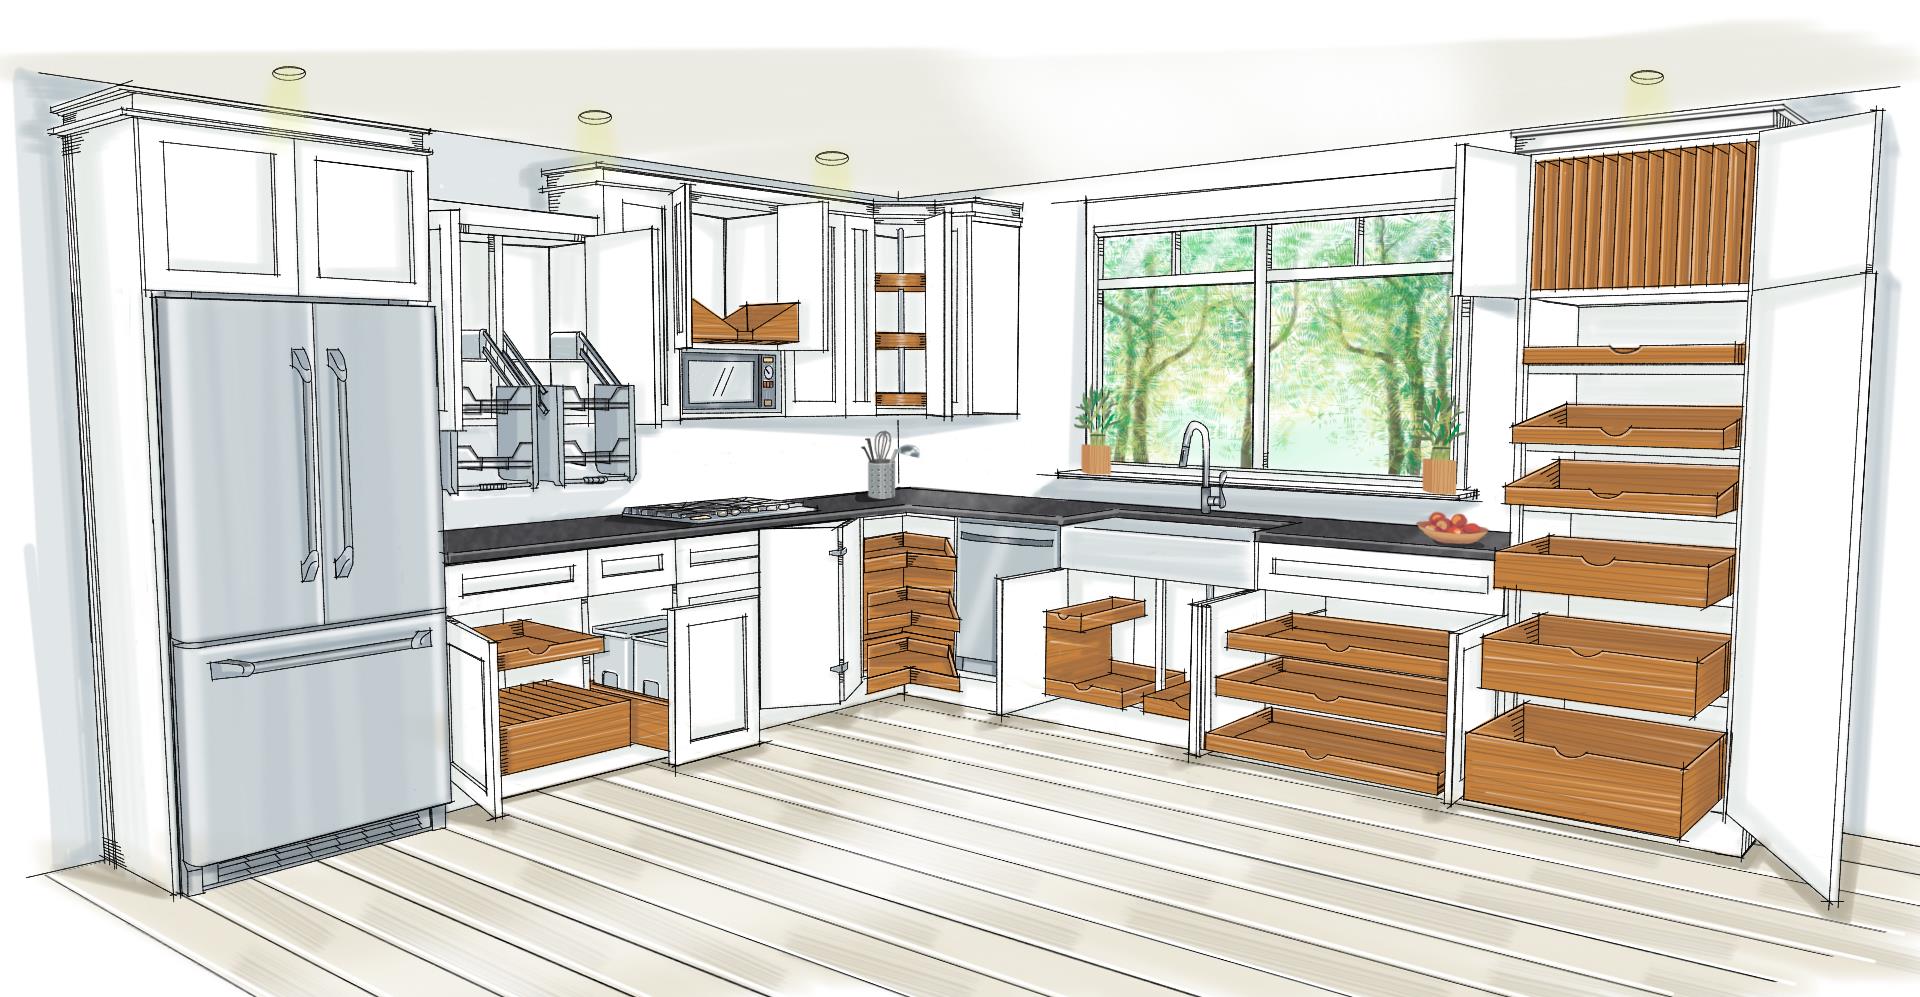 draw kitchen cabinets sketchup online free